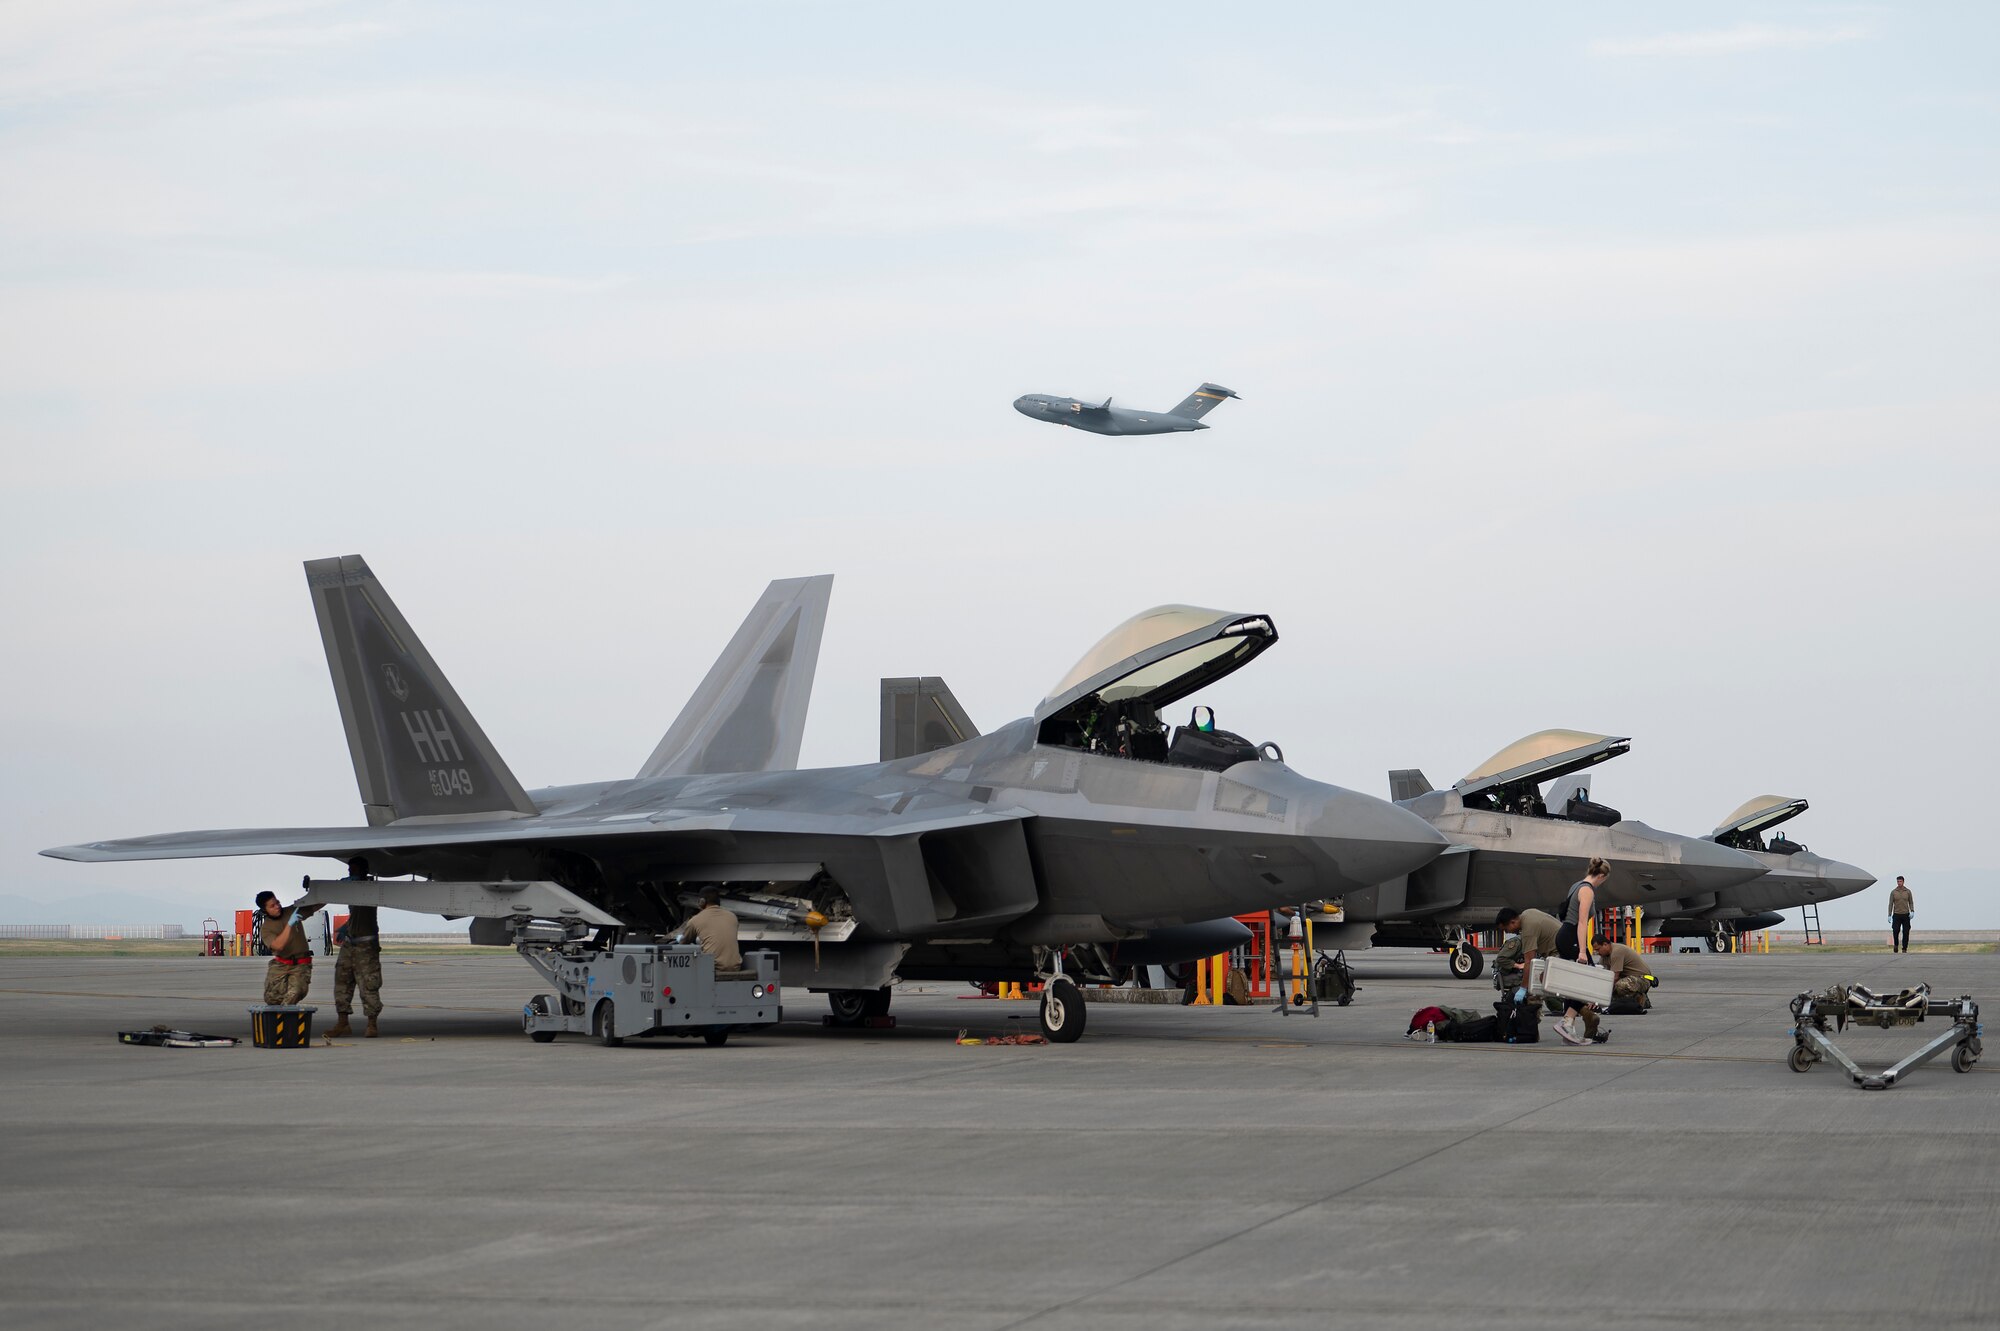 U.S. Air Force F-22 Raptor fighter jets assigned to the 199th Expeditionary Fighter Squadron undergo post-flight procedures as a C-17 Globemaster III transport aircraft takes off from Marine Corps Air Station Iwakuni, Japan, June 15, 2022. The 199th EFS traveled to Iwakuni for an agile combat employment training event, during which the unit is assigned to the 354th Air Expeditionary Wing and integrated with the 356th Expeditionary Fighter Squadron to refine fifth generation integration tactics, techniques and procedures. (U.S. Air Force photo by Staff Sgt. Zade Vadnais)